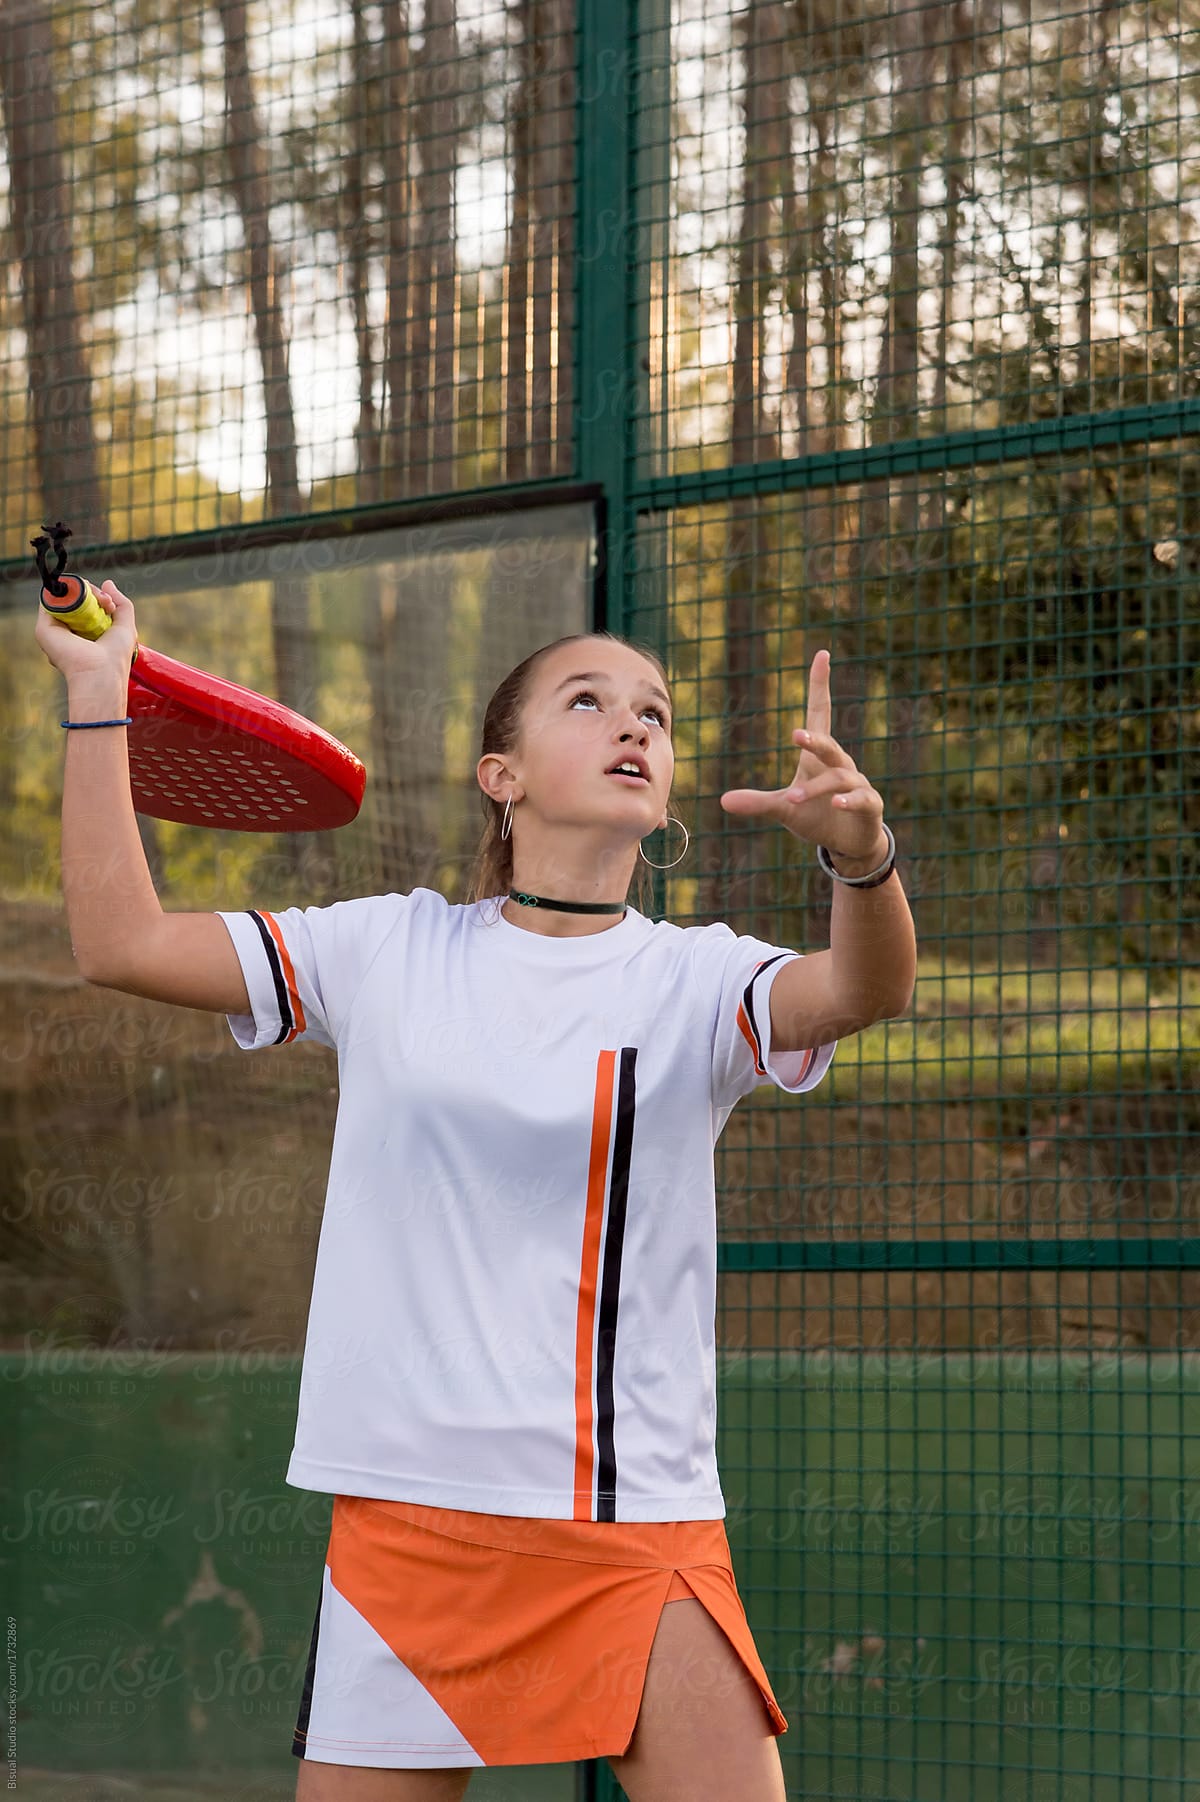 Young girl playing paddle tennis outdoors